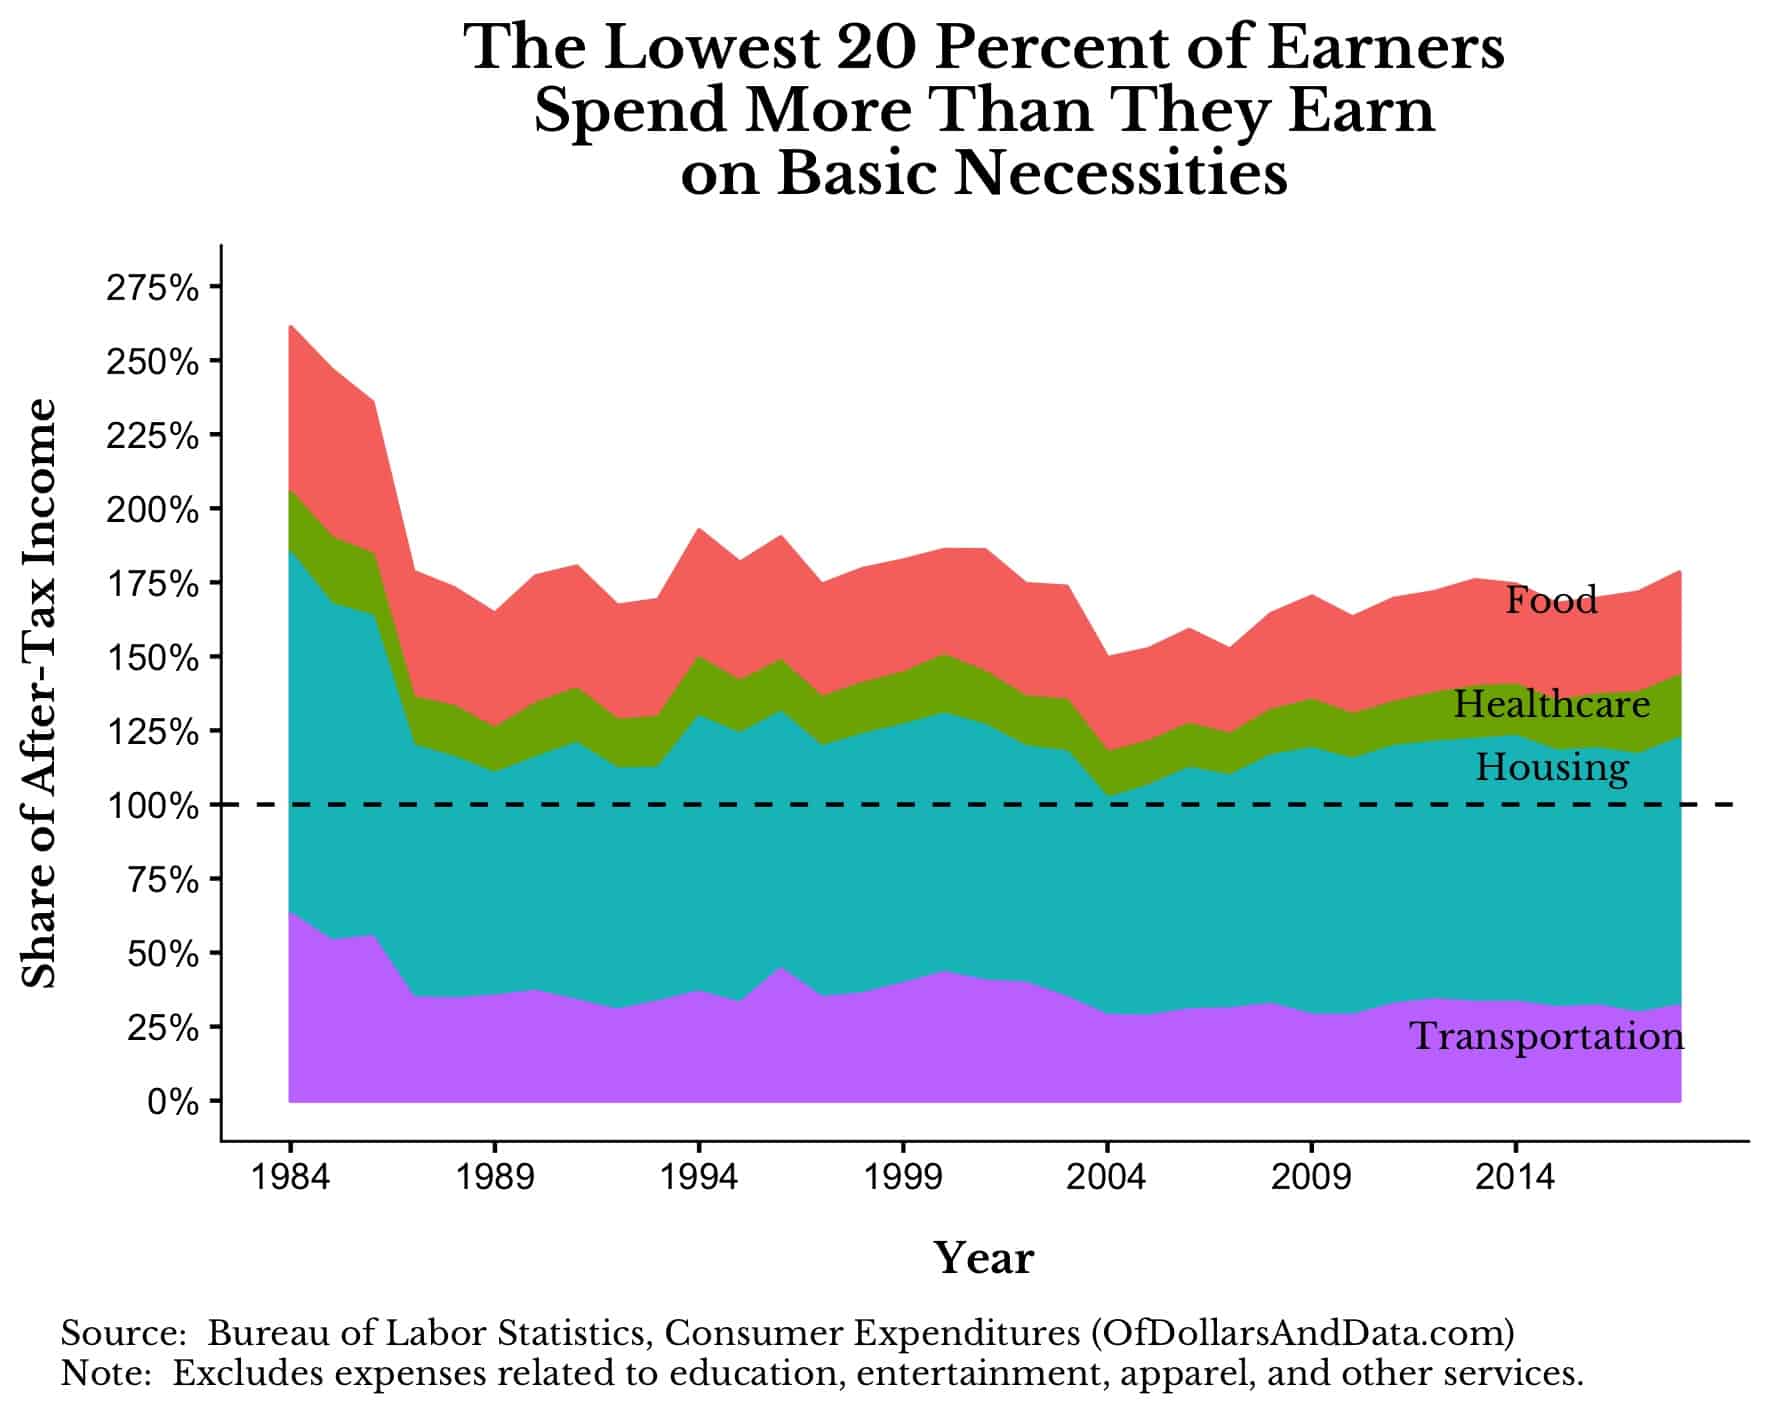 Basic necessity costs as a percentage of income for the lowest 20 percent of earners over time